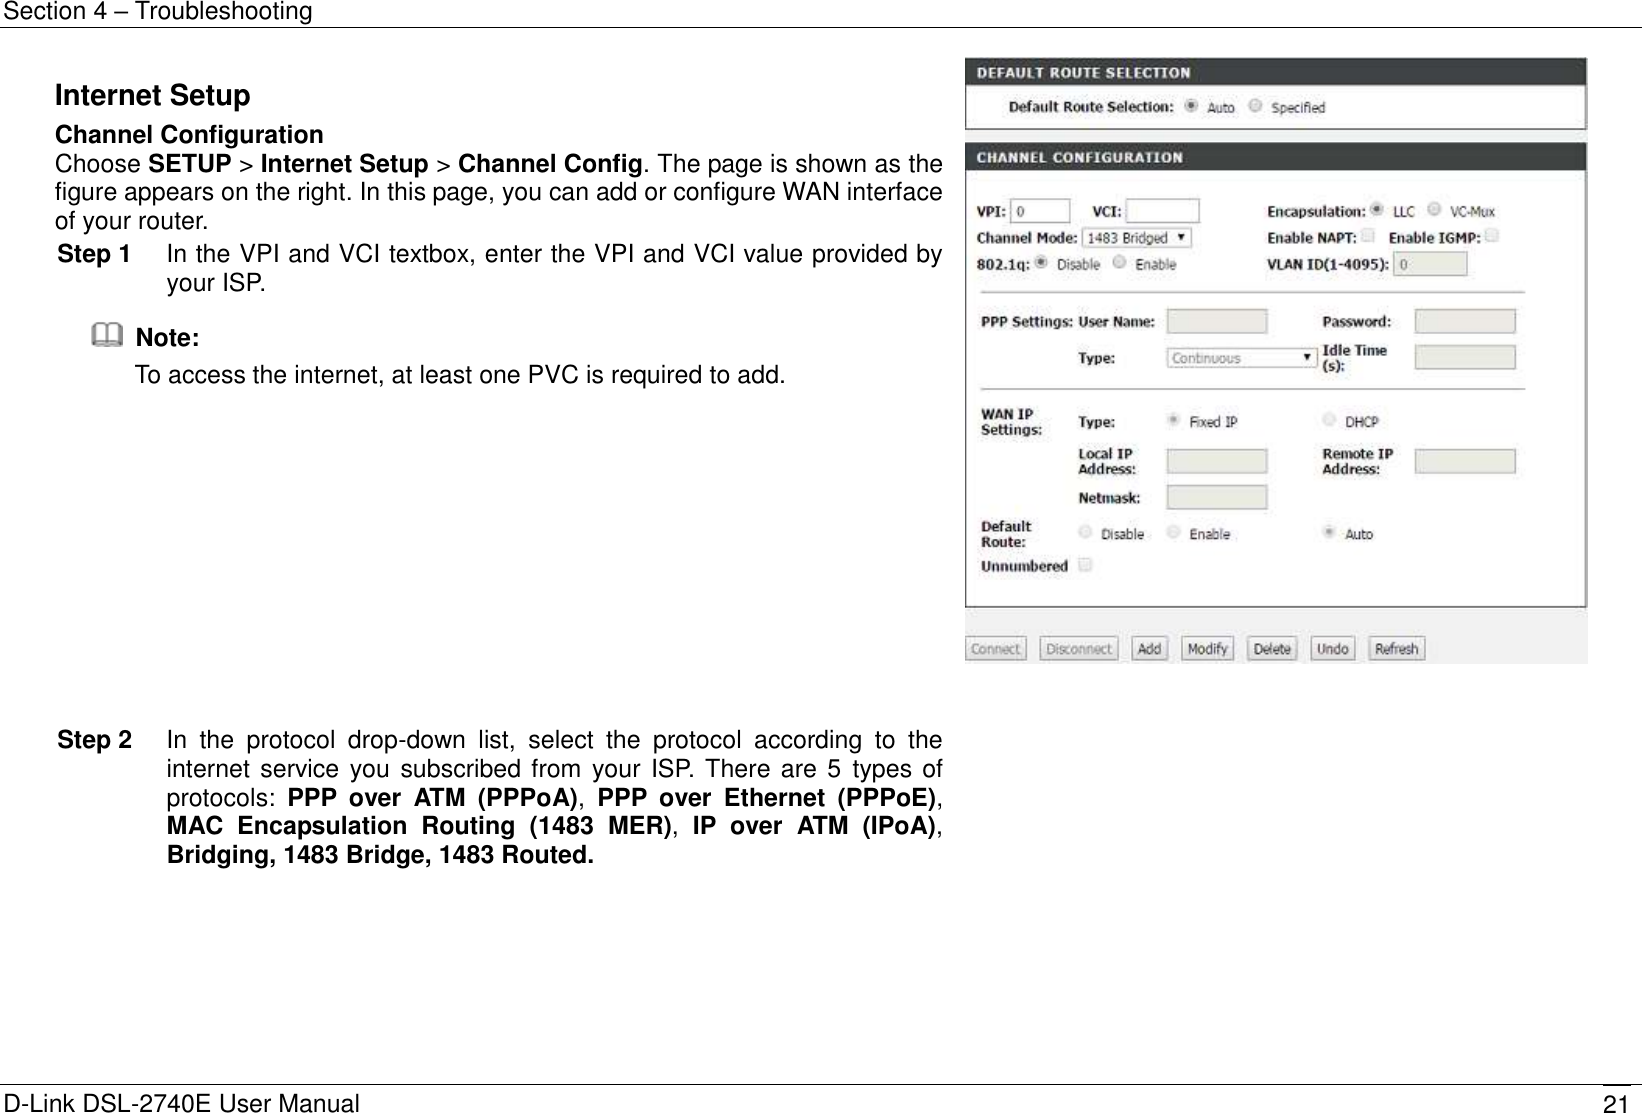 Section 4 – Troubleshooting D-Link DSL-2740E User Manual 21 Internet Setup Channel Configuration Choose SETUP &gt; Internet Setup &gt; Channel Config. The page is shown as the figure appears on the right. In this page, you can add or configure WAN interface of your router. Step 1  In the VPI and VCI textbox, enter the VPI and VCI value provided by your ISP.   Note: To access the internet, at least one PVC is required to add.    Step 2  In  the  protocol  drop-down  list,  select  the  protocol  according  to  the internet service you subscribed from your ISP. There are 5  types of protocols:  PPP  over  ATM  (PPPoA),  PPP  over  Ethernet  (PPPoE), MAC  Encapsulation  Routing  (1483  MER),  IP  over  ATM  (IPoA), Bridging, 1483 Bridge, 1483 Routed.    